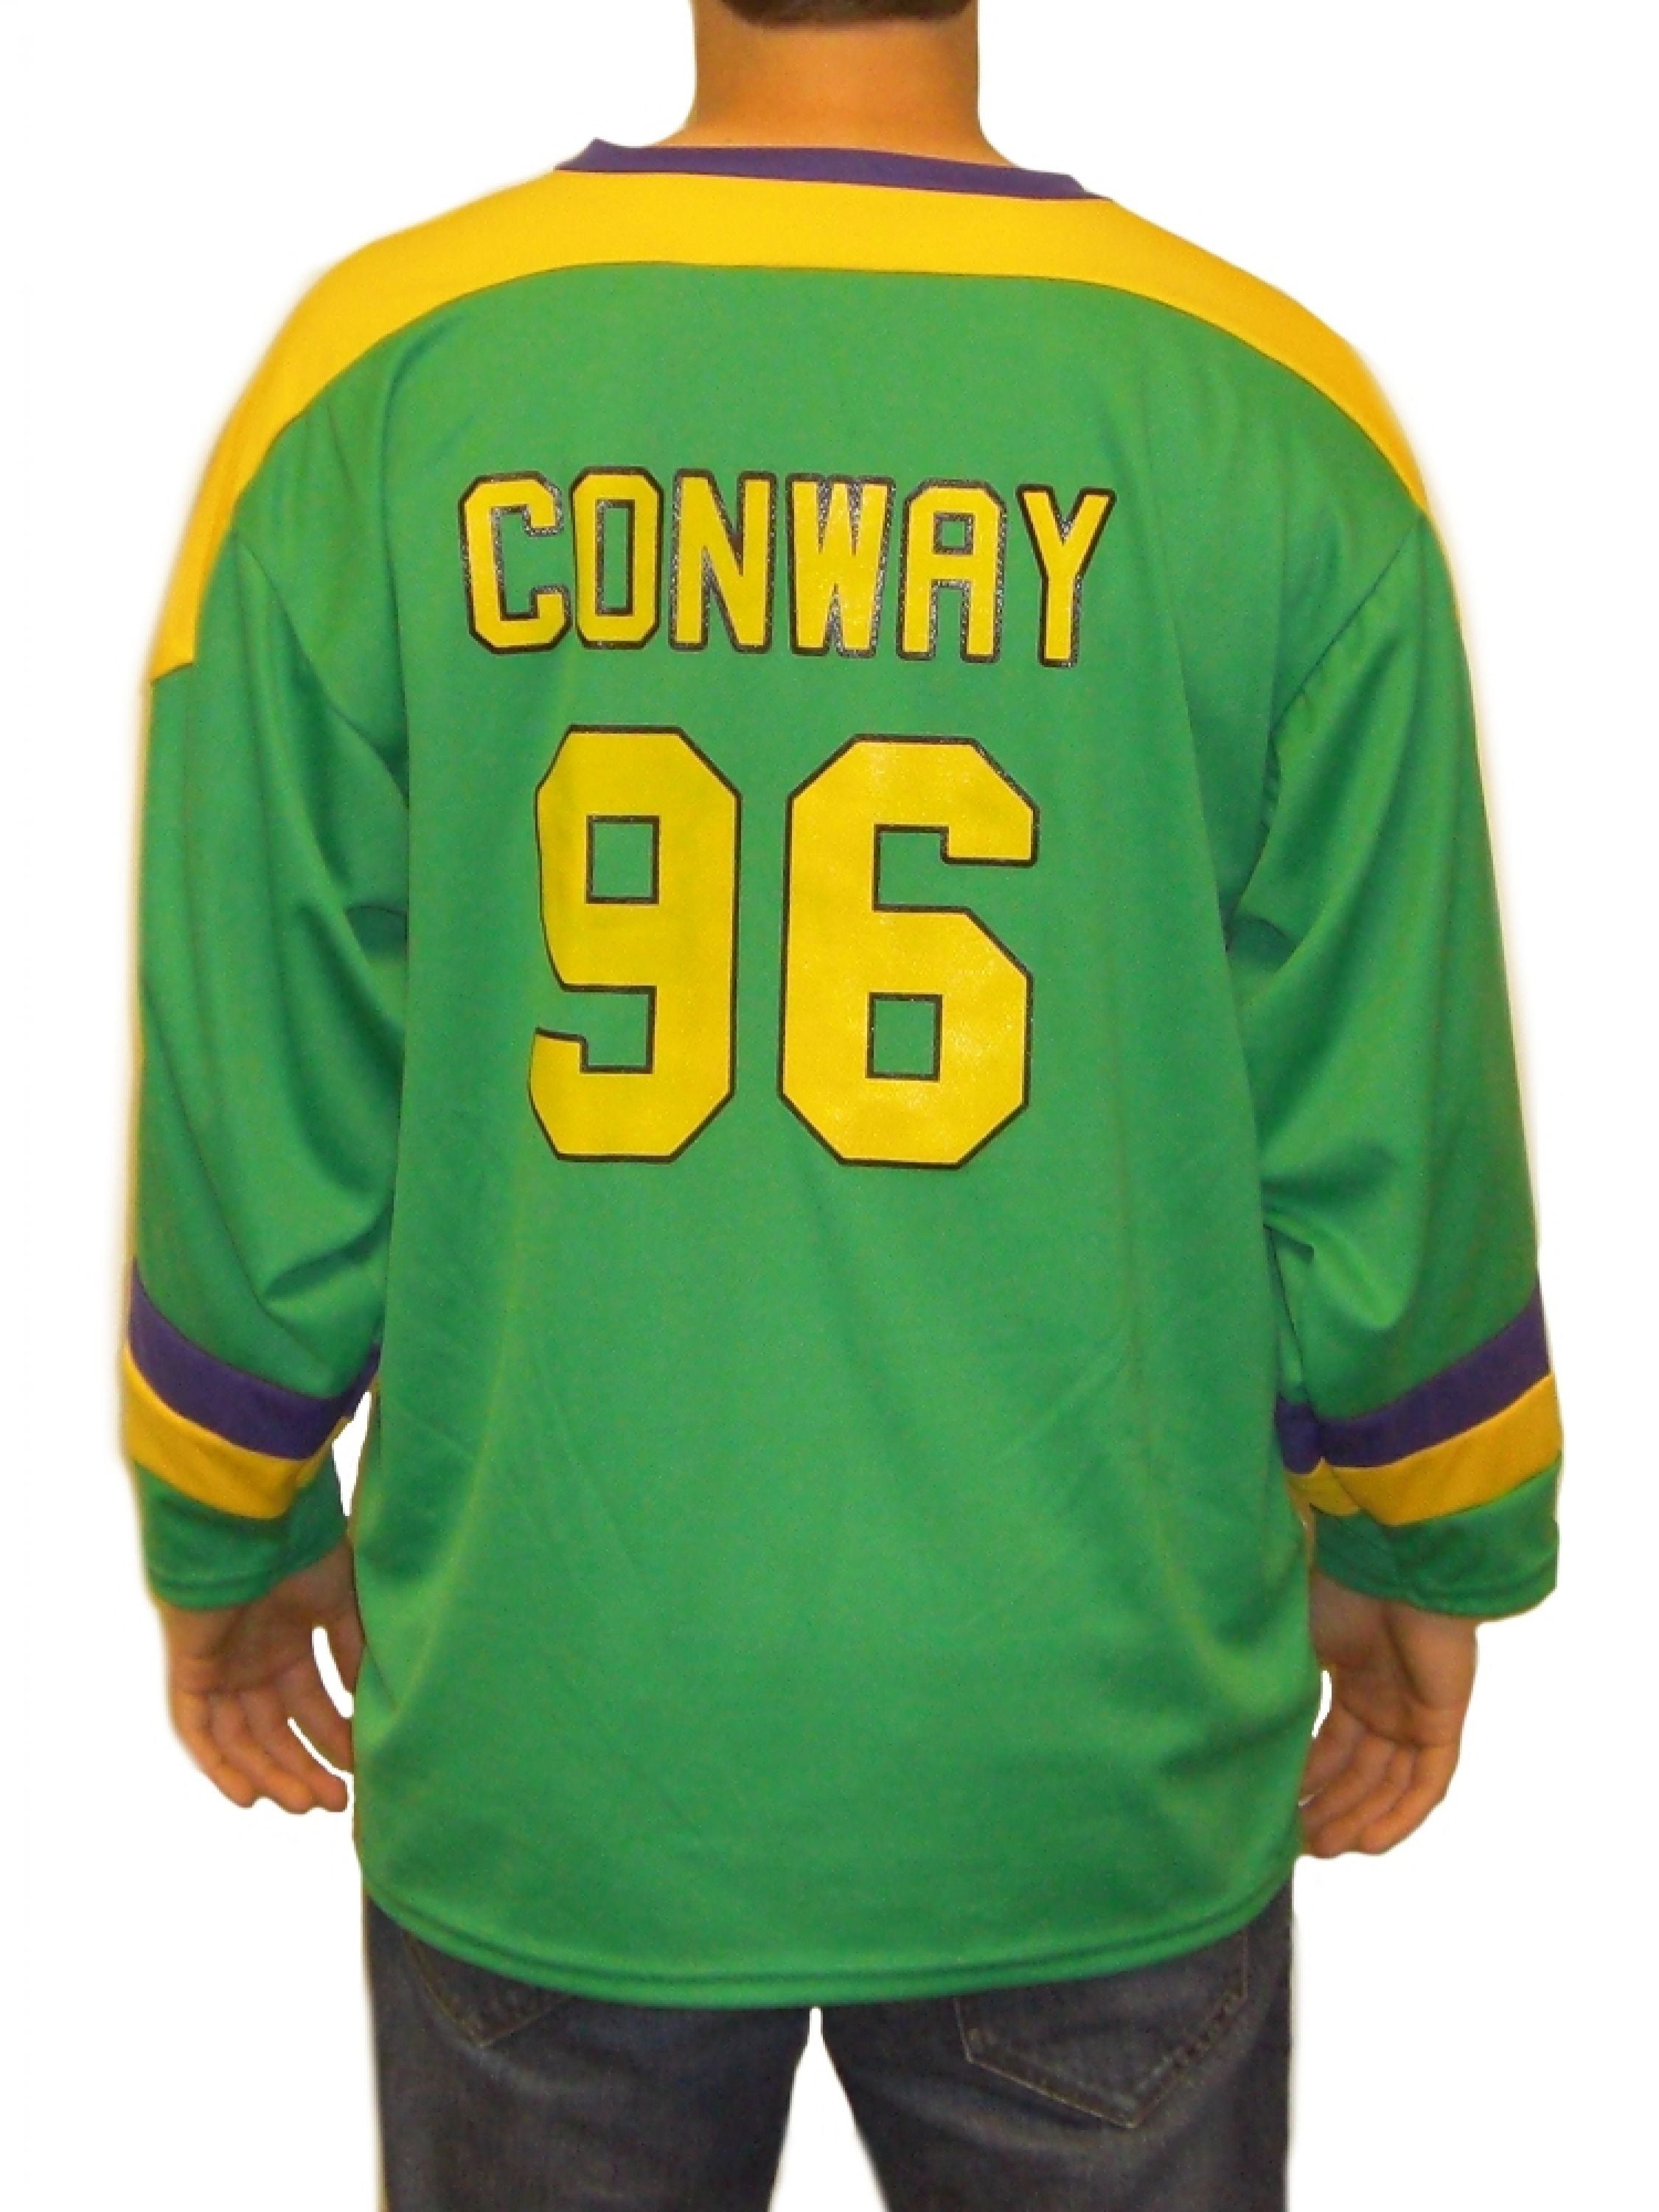 charlie conway jersey